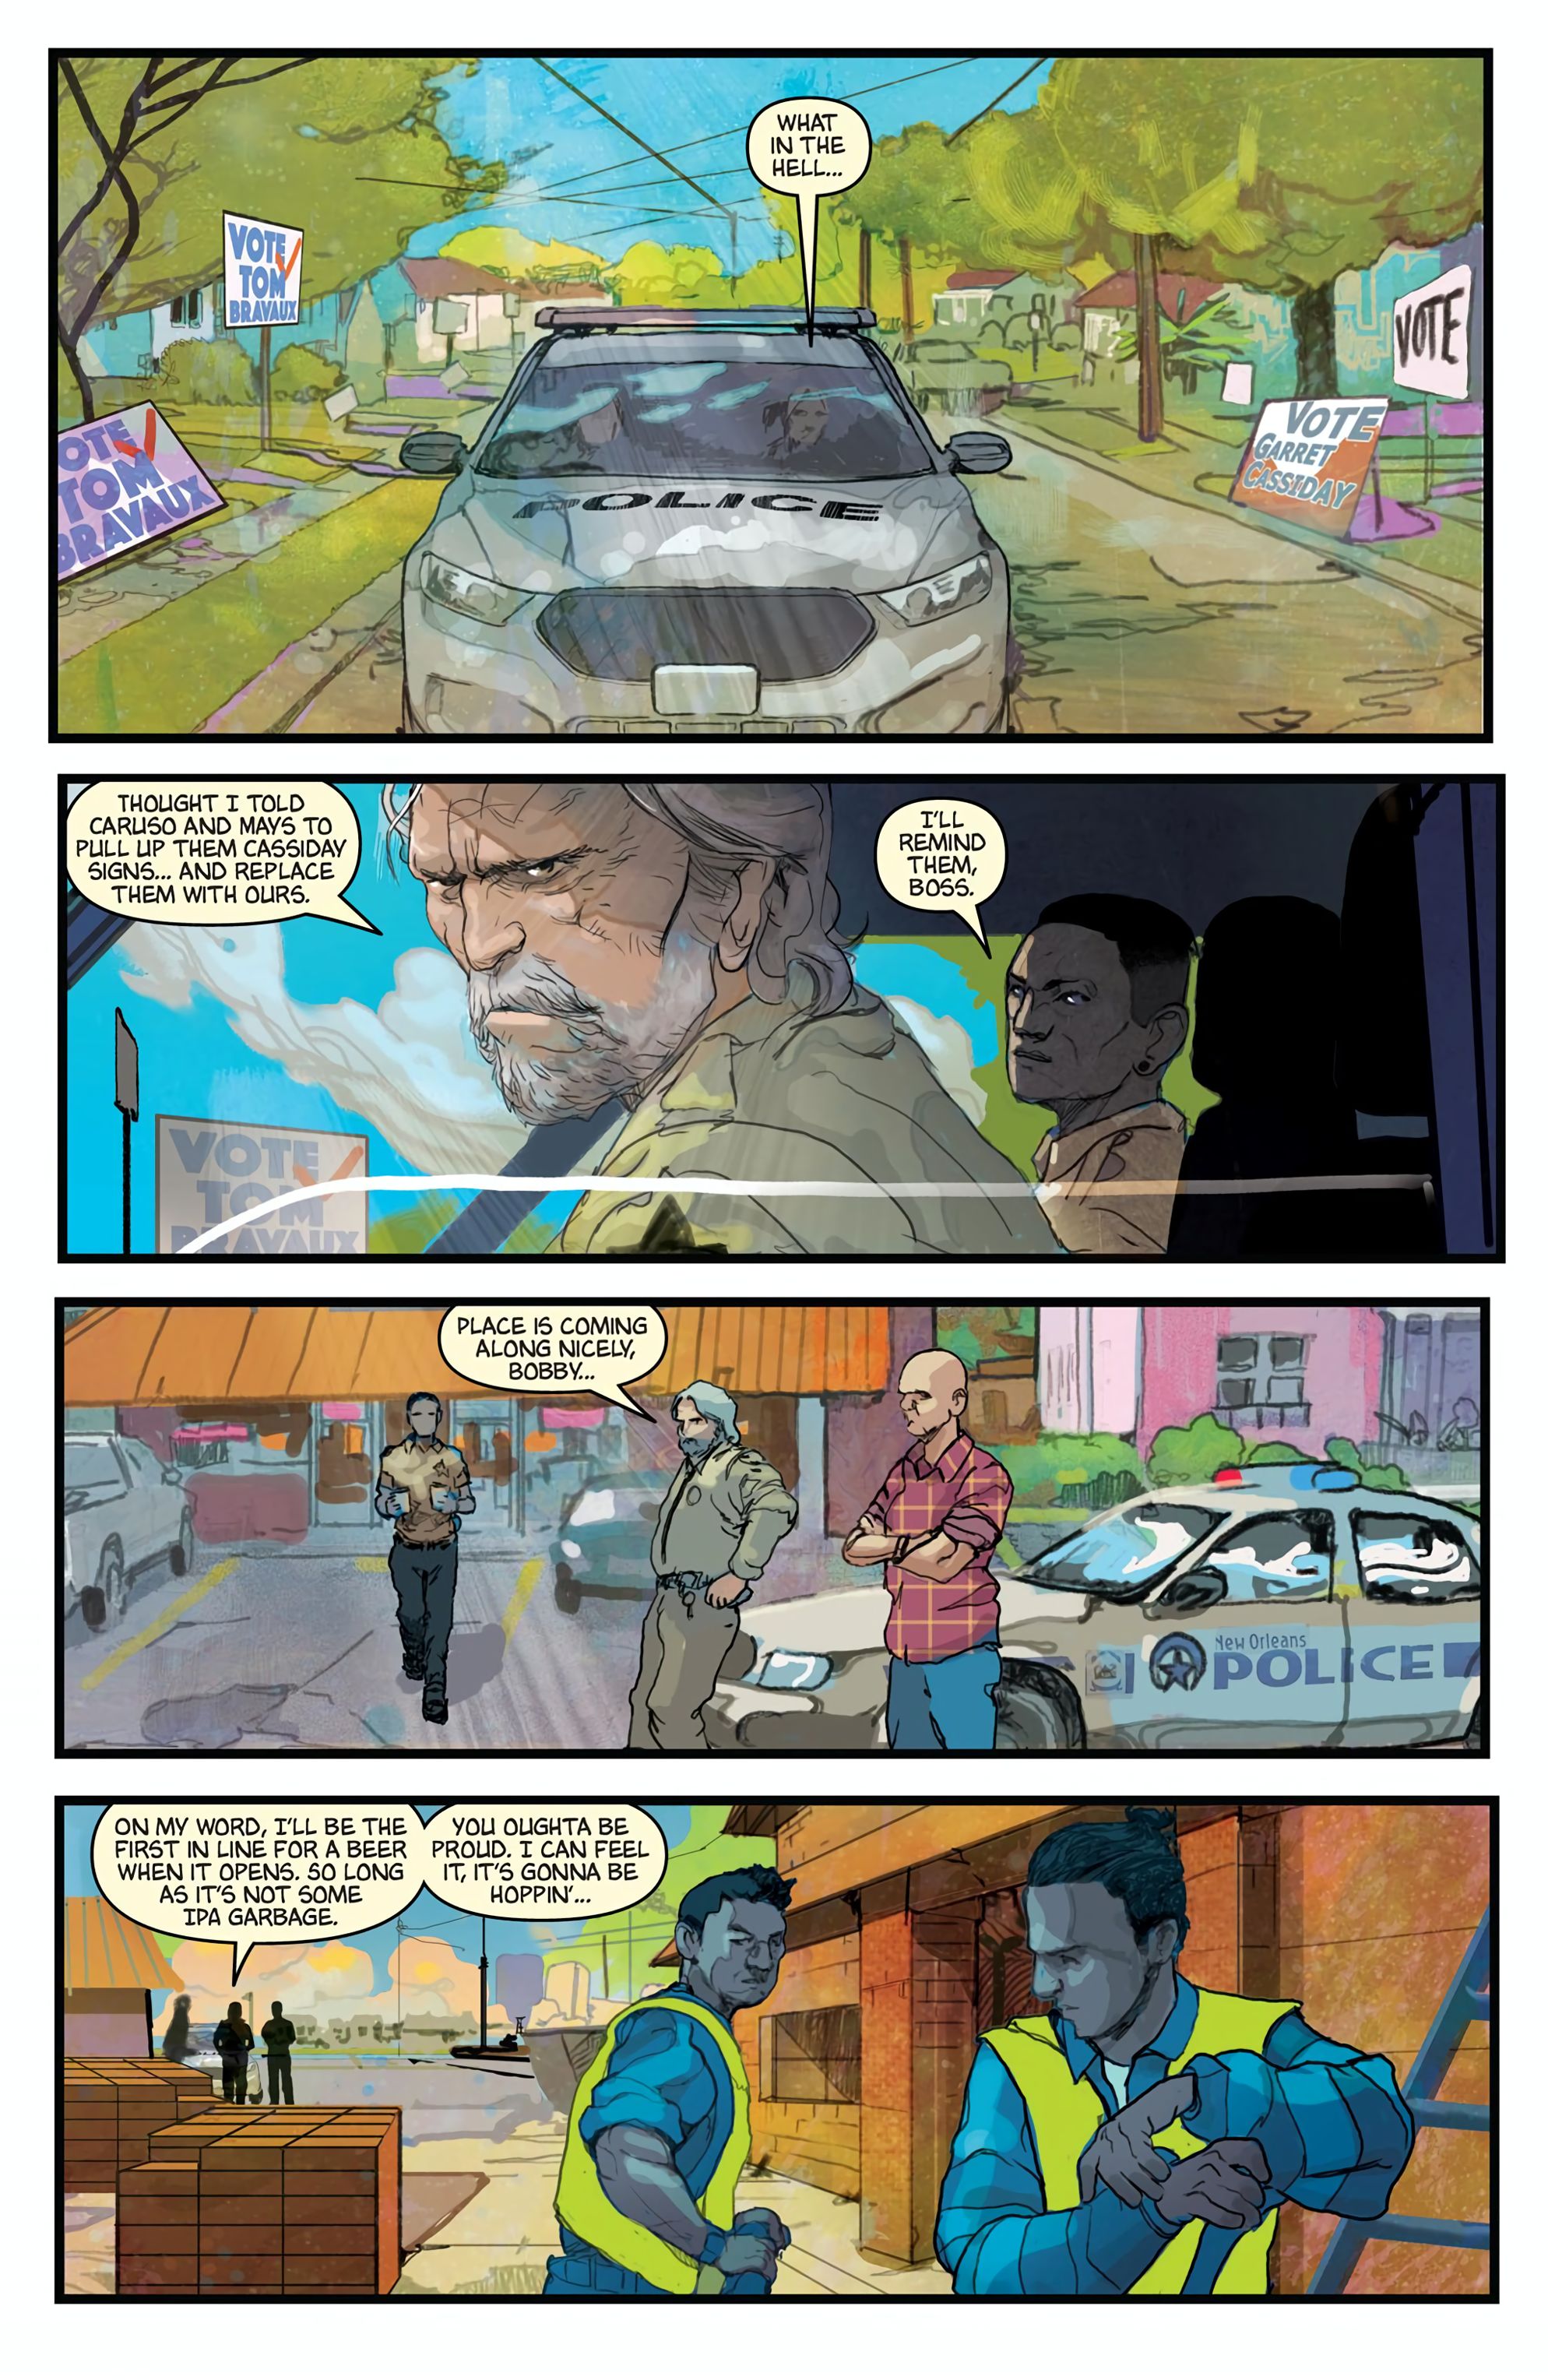 Read online Head Wounds: Sparrow comic -  Issue # TPB - 13